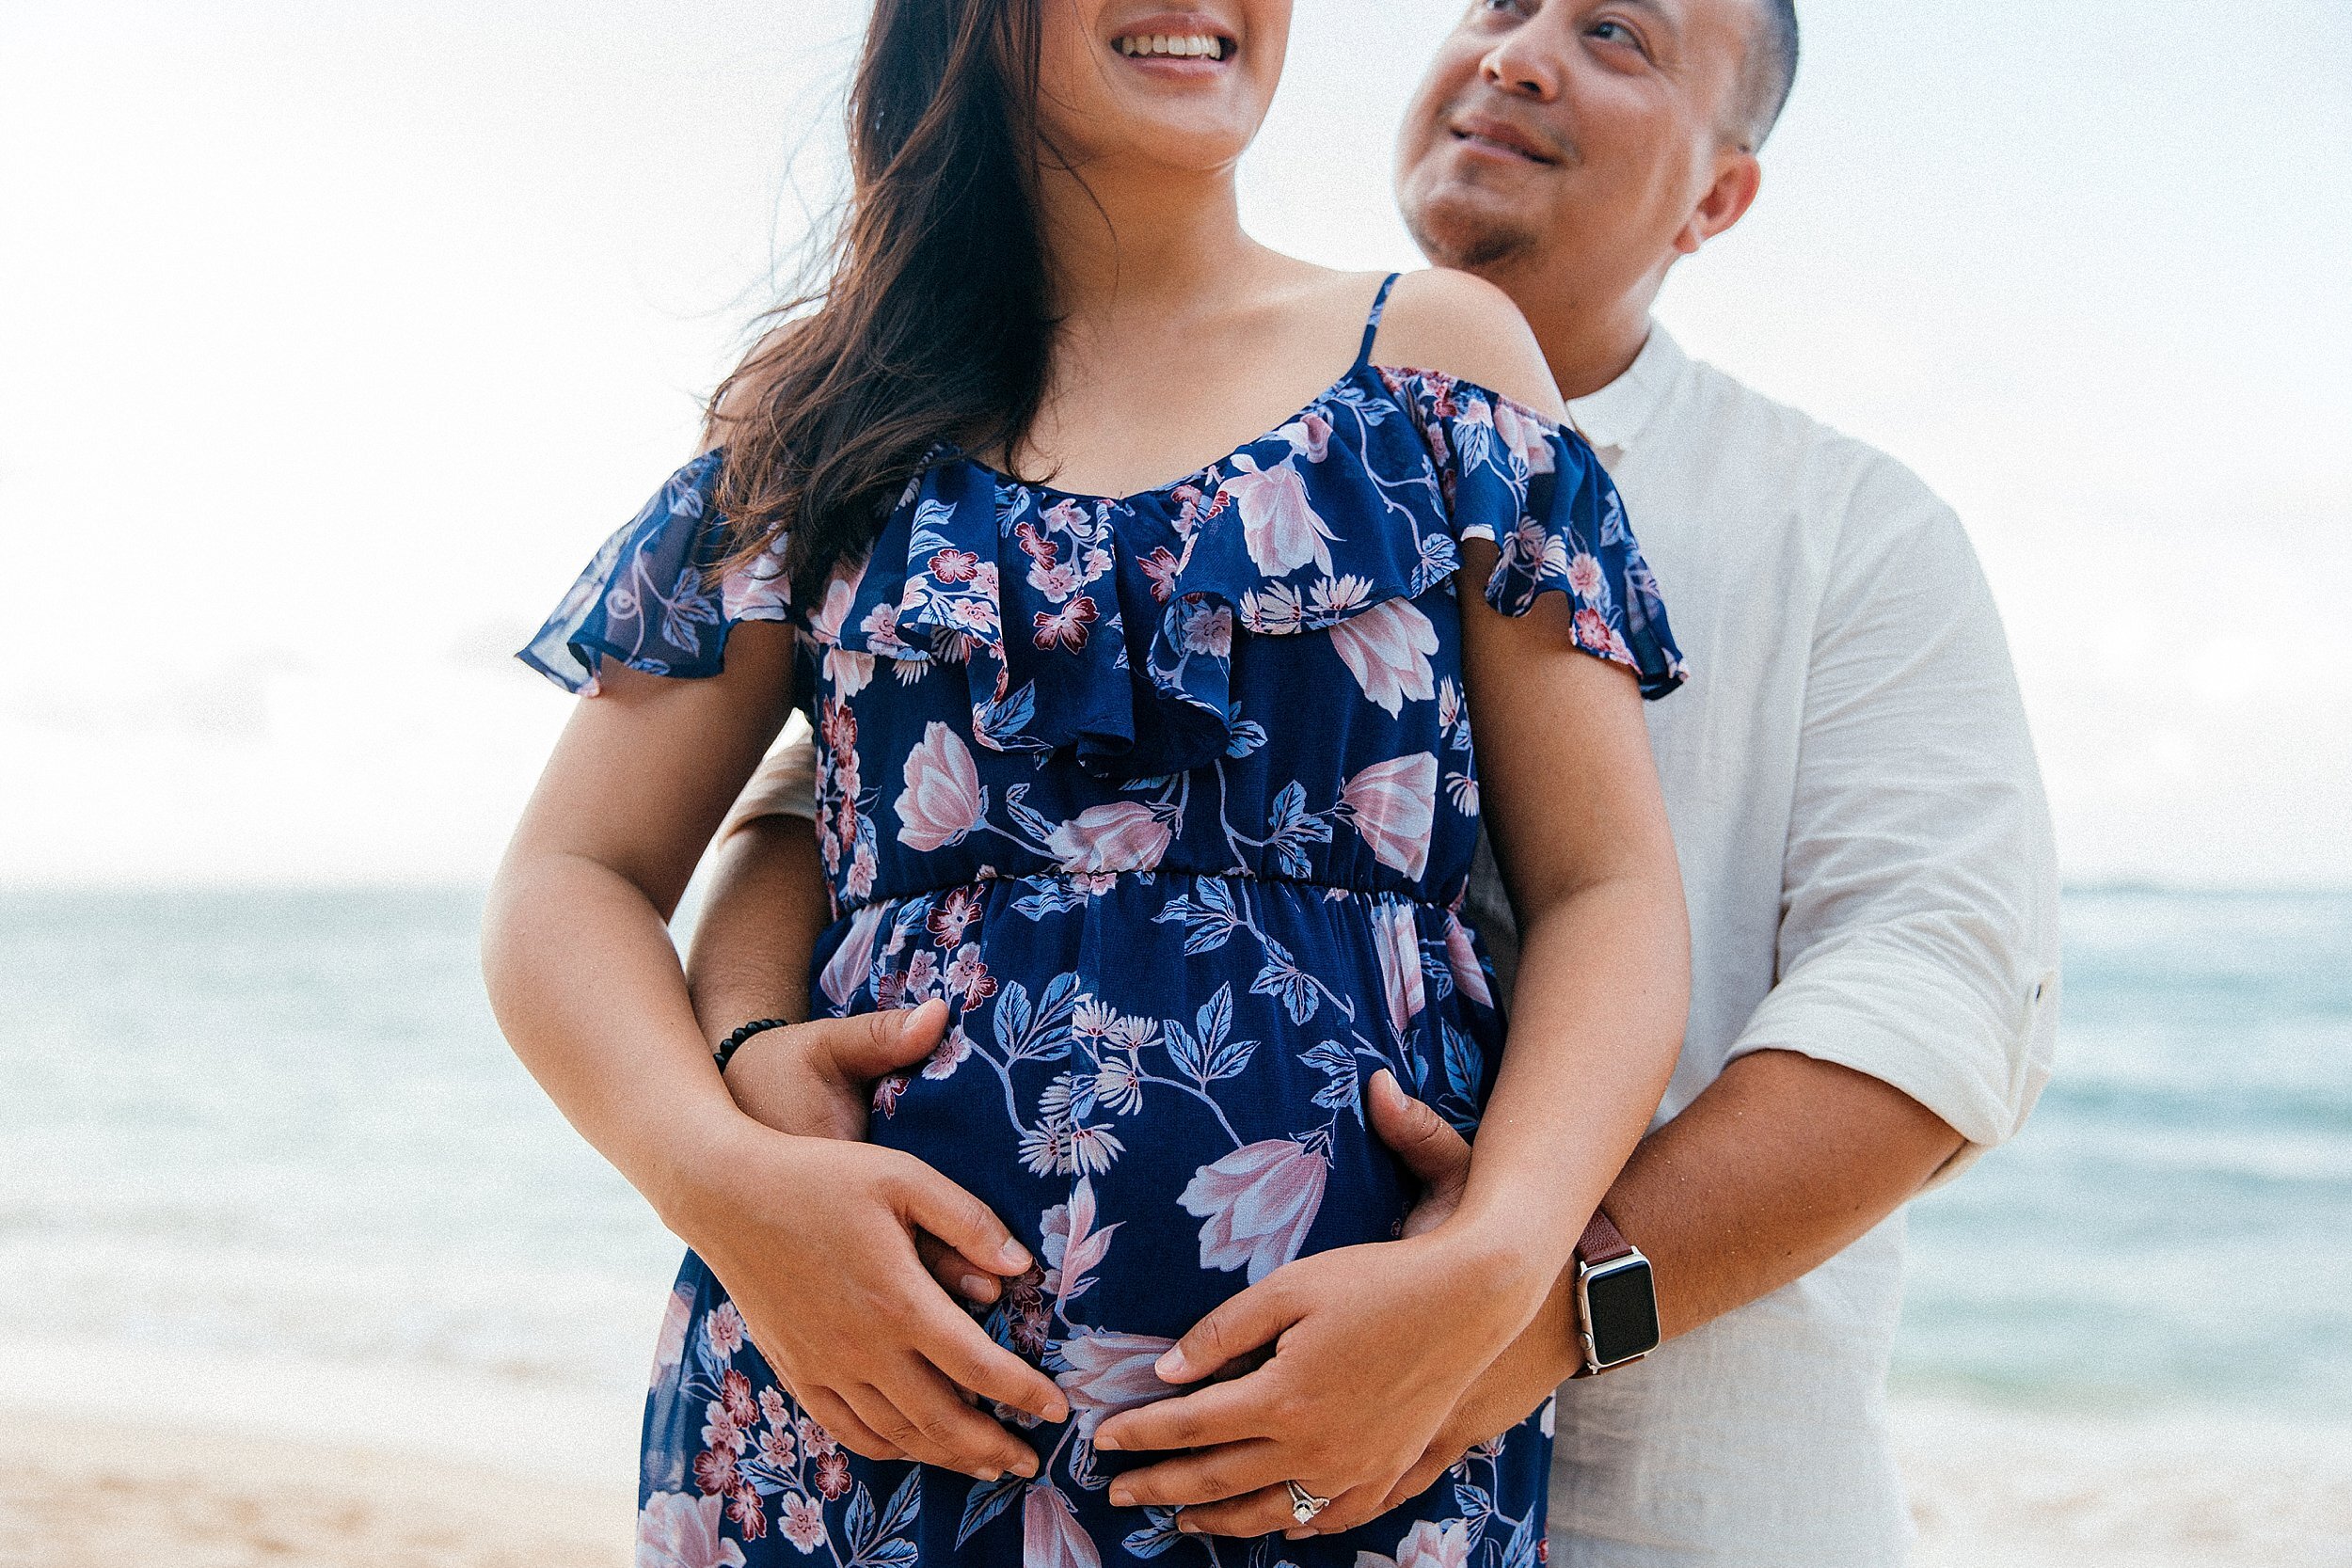  Vow Renewal and Family Session at Temple Beach in Laie 